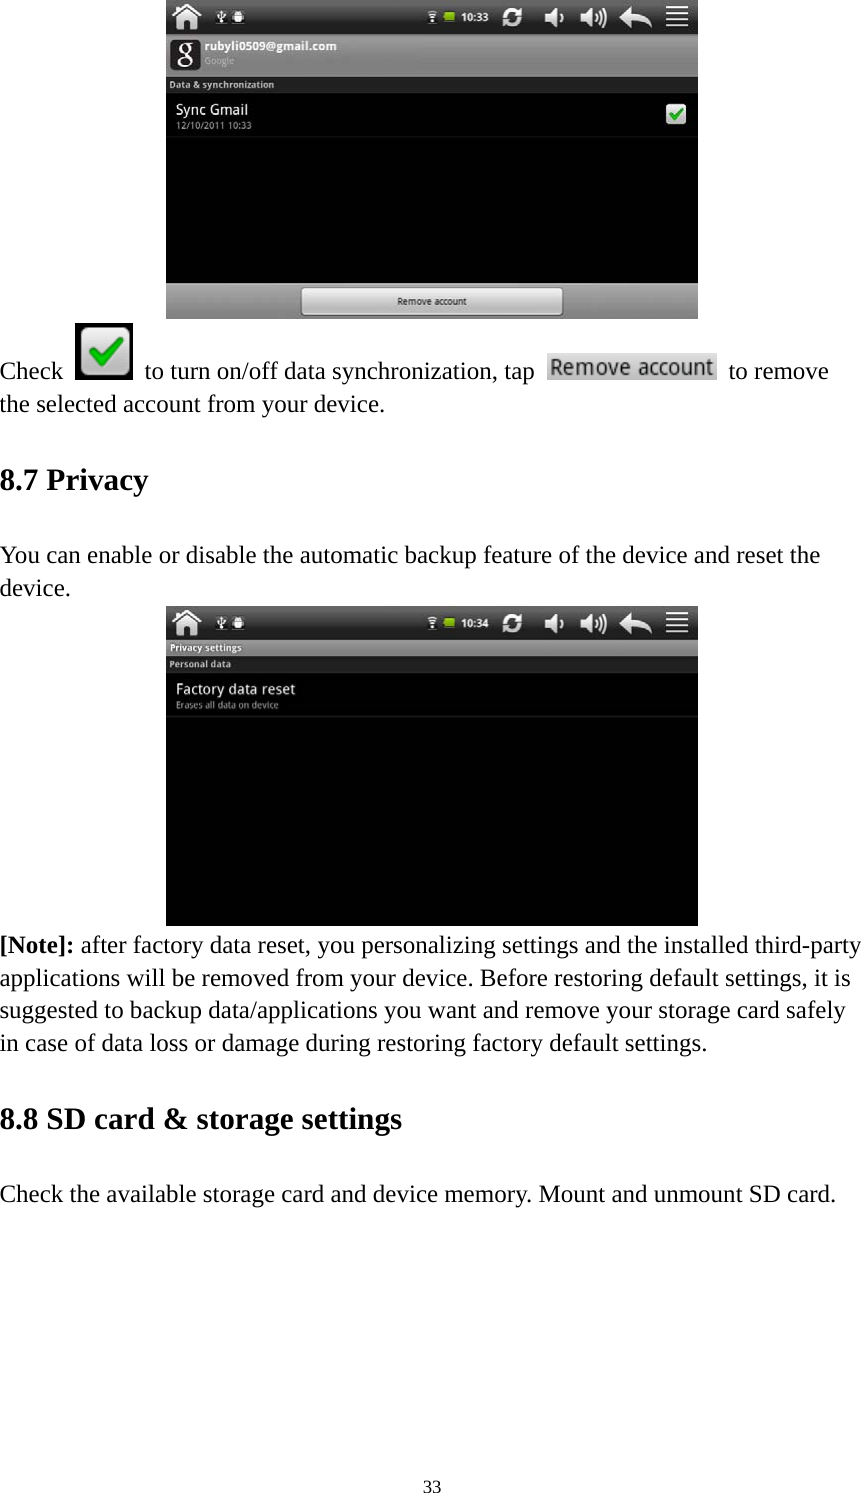 33  Check    to turn on/off data synchronization, tap   to remove the selected account from your device.   8.7 Privacy   You can enable or disable the automatic backup feature of the device and reset the device.   [Note]: after factory data reset, you personalizing settings and the installed third-party applications will be removed from your device. Before restoring default settings, it is suggested to backup data/applications you want and remove your storage card safely in case of data loss or damage during restoring factory default settings.   8.8 SD card &amp; storage settings Check the available storage card and device memory. Mount and unmount SD card.   